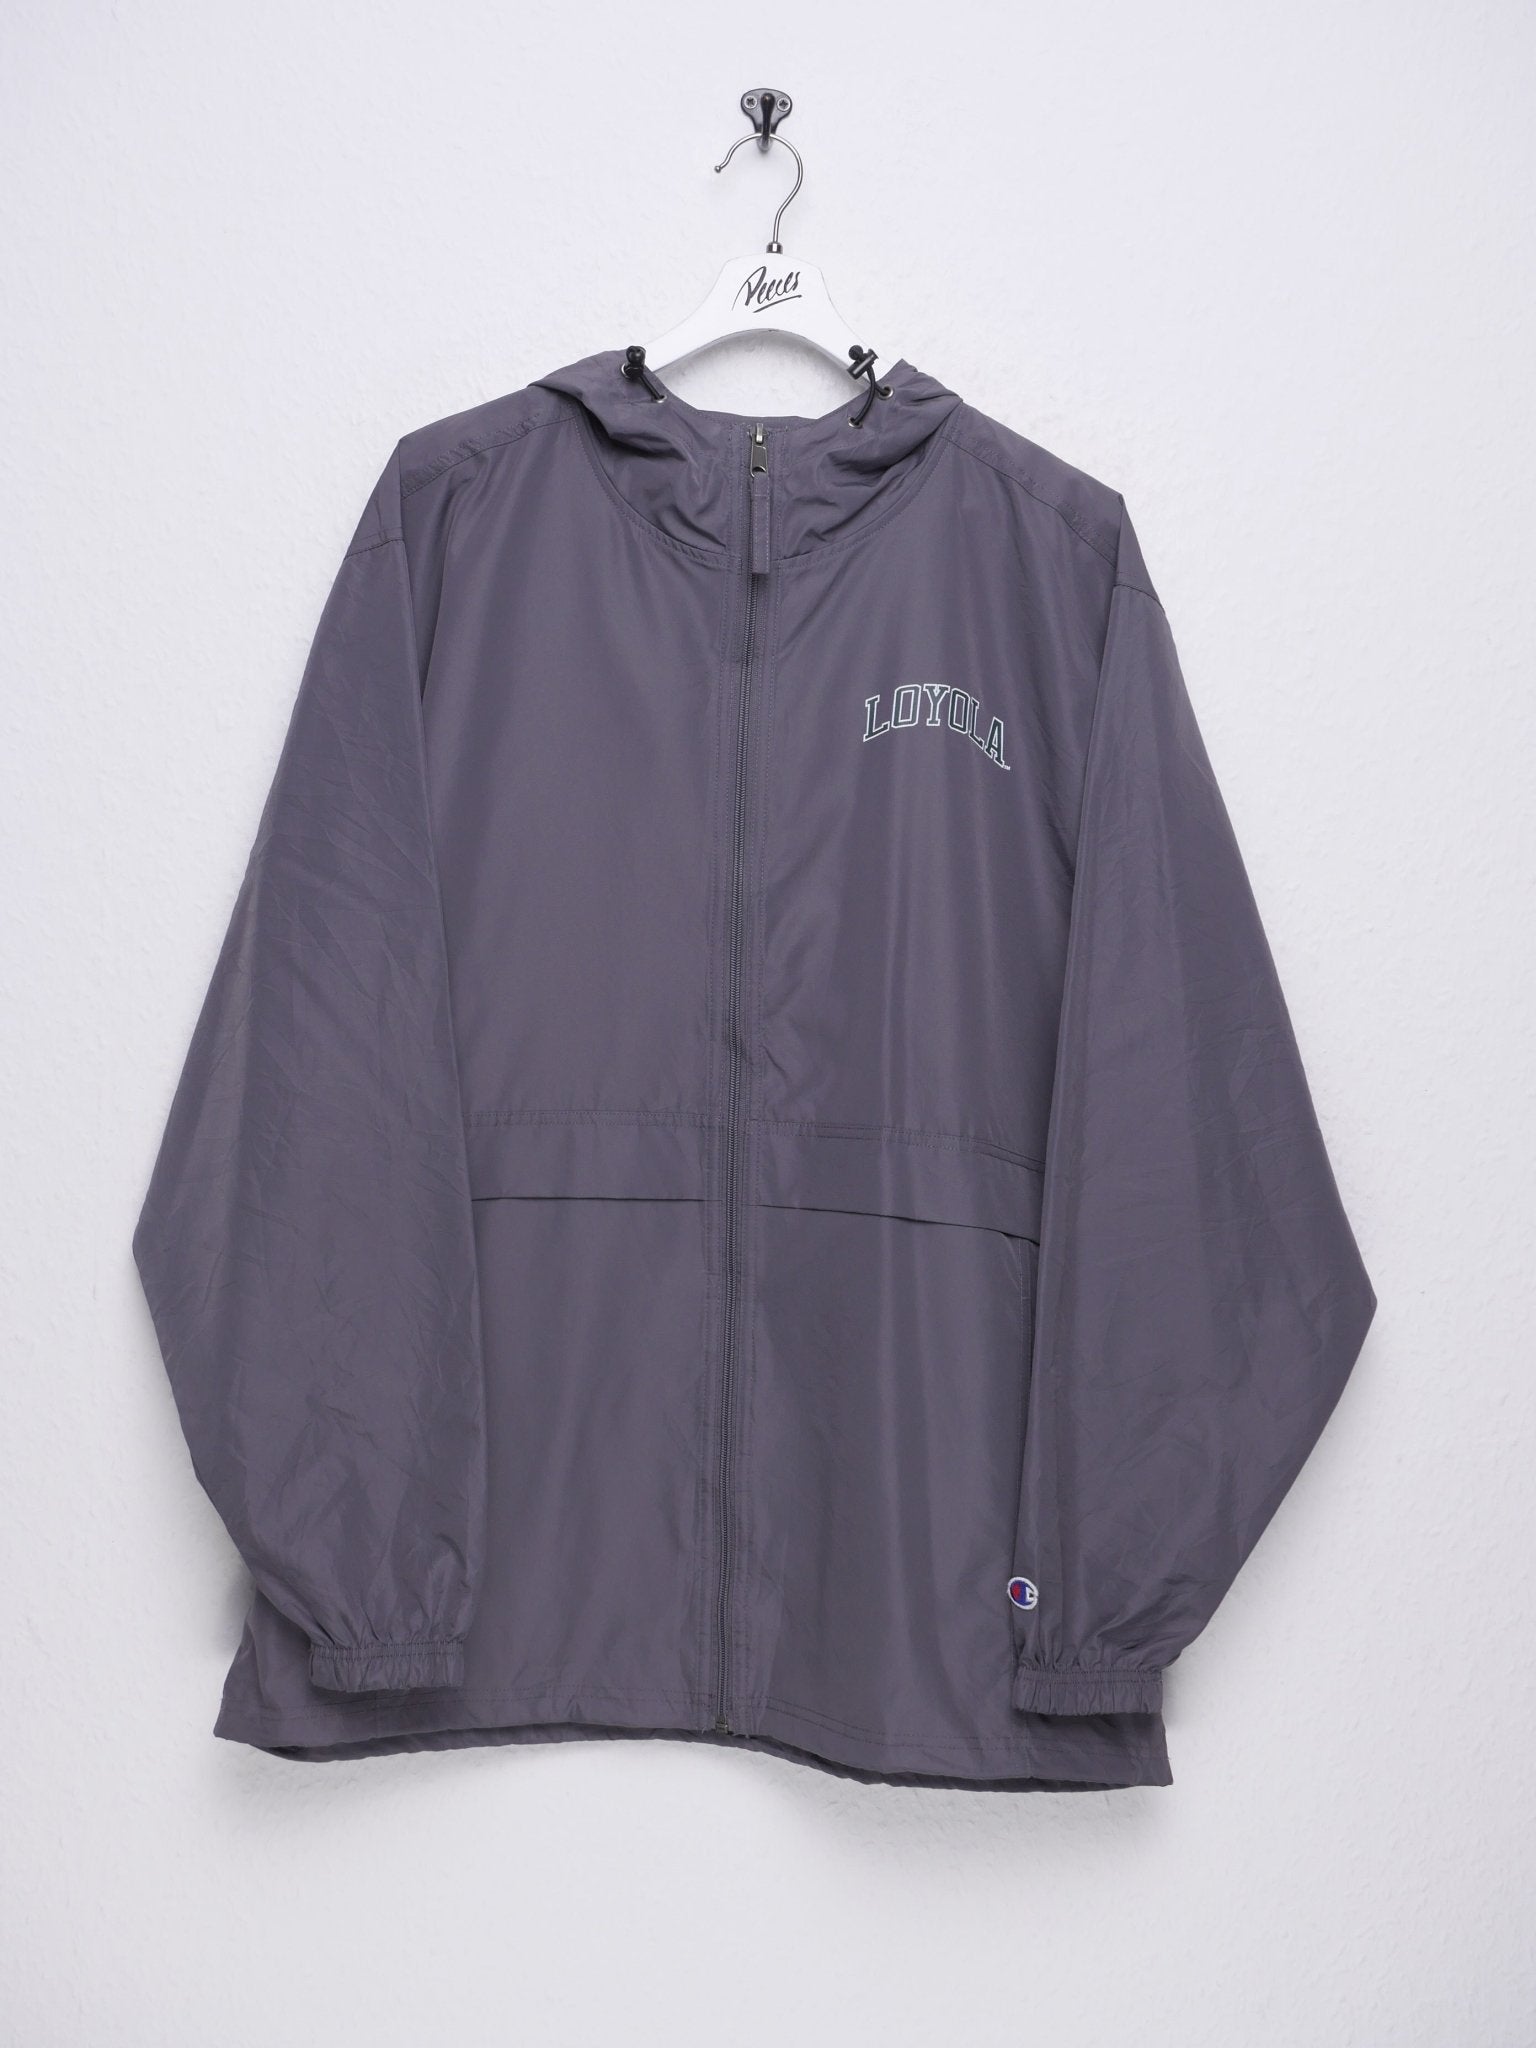 Champion printed 'Layola' Spellout grey Track Jacke - Peeces